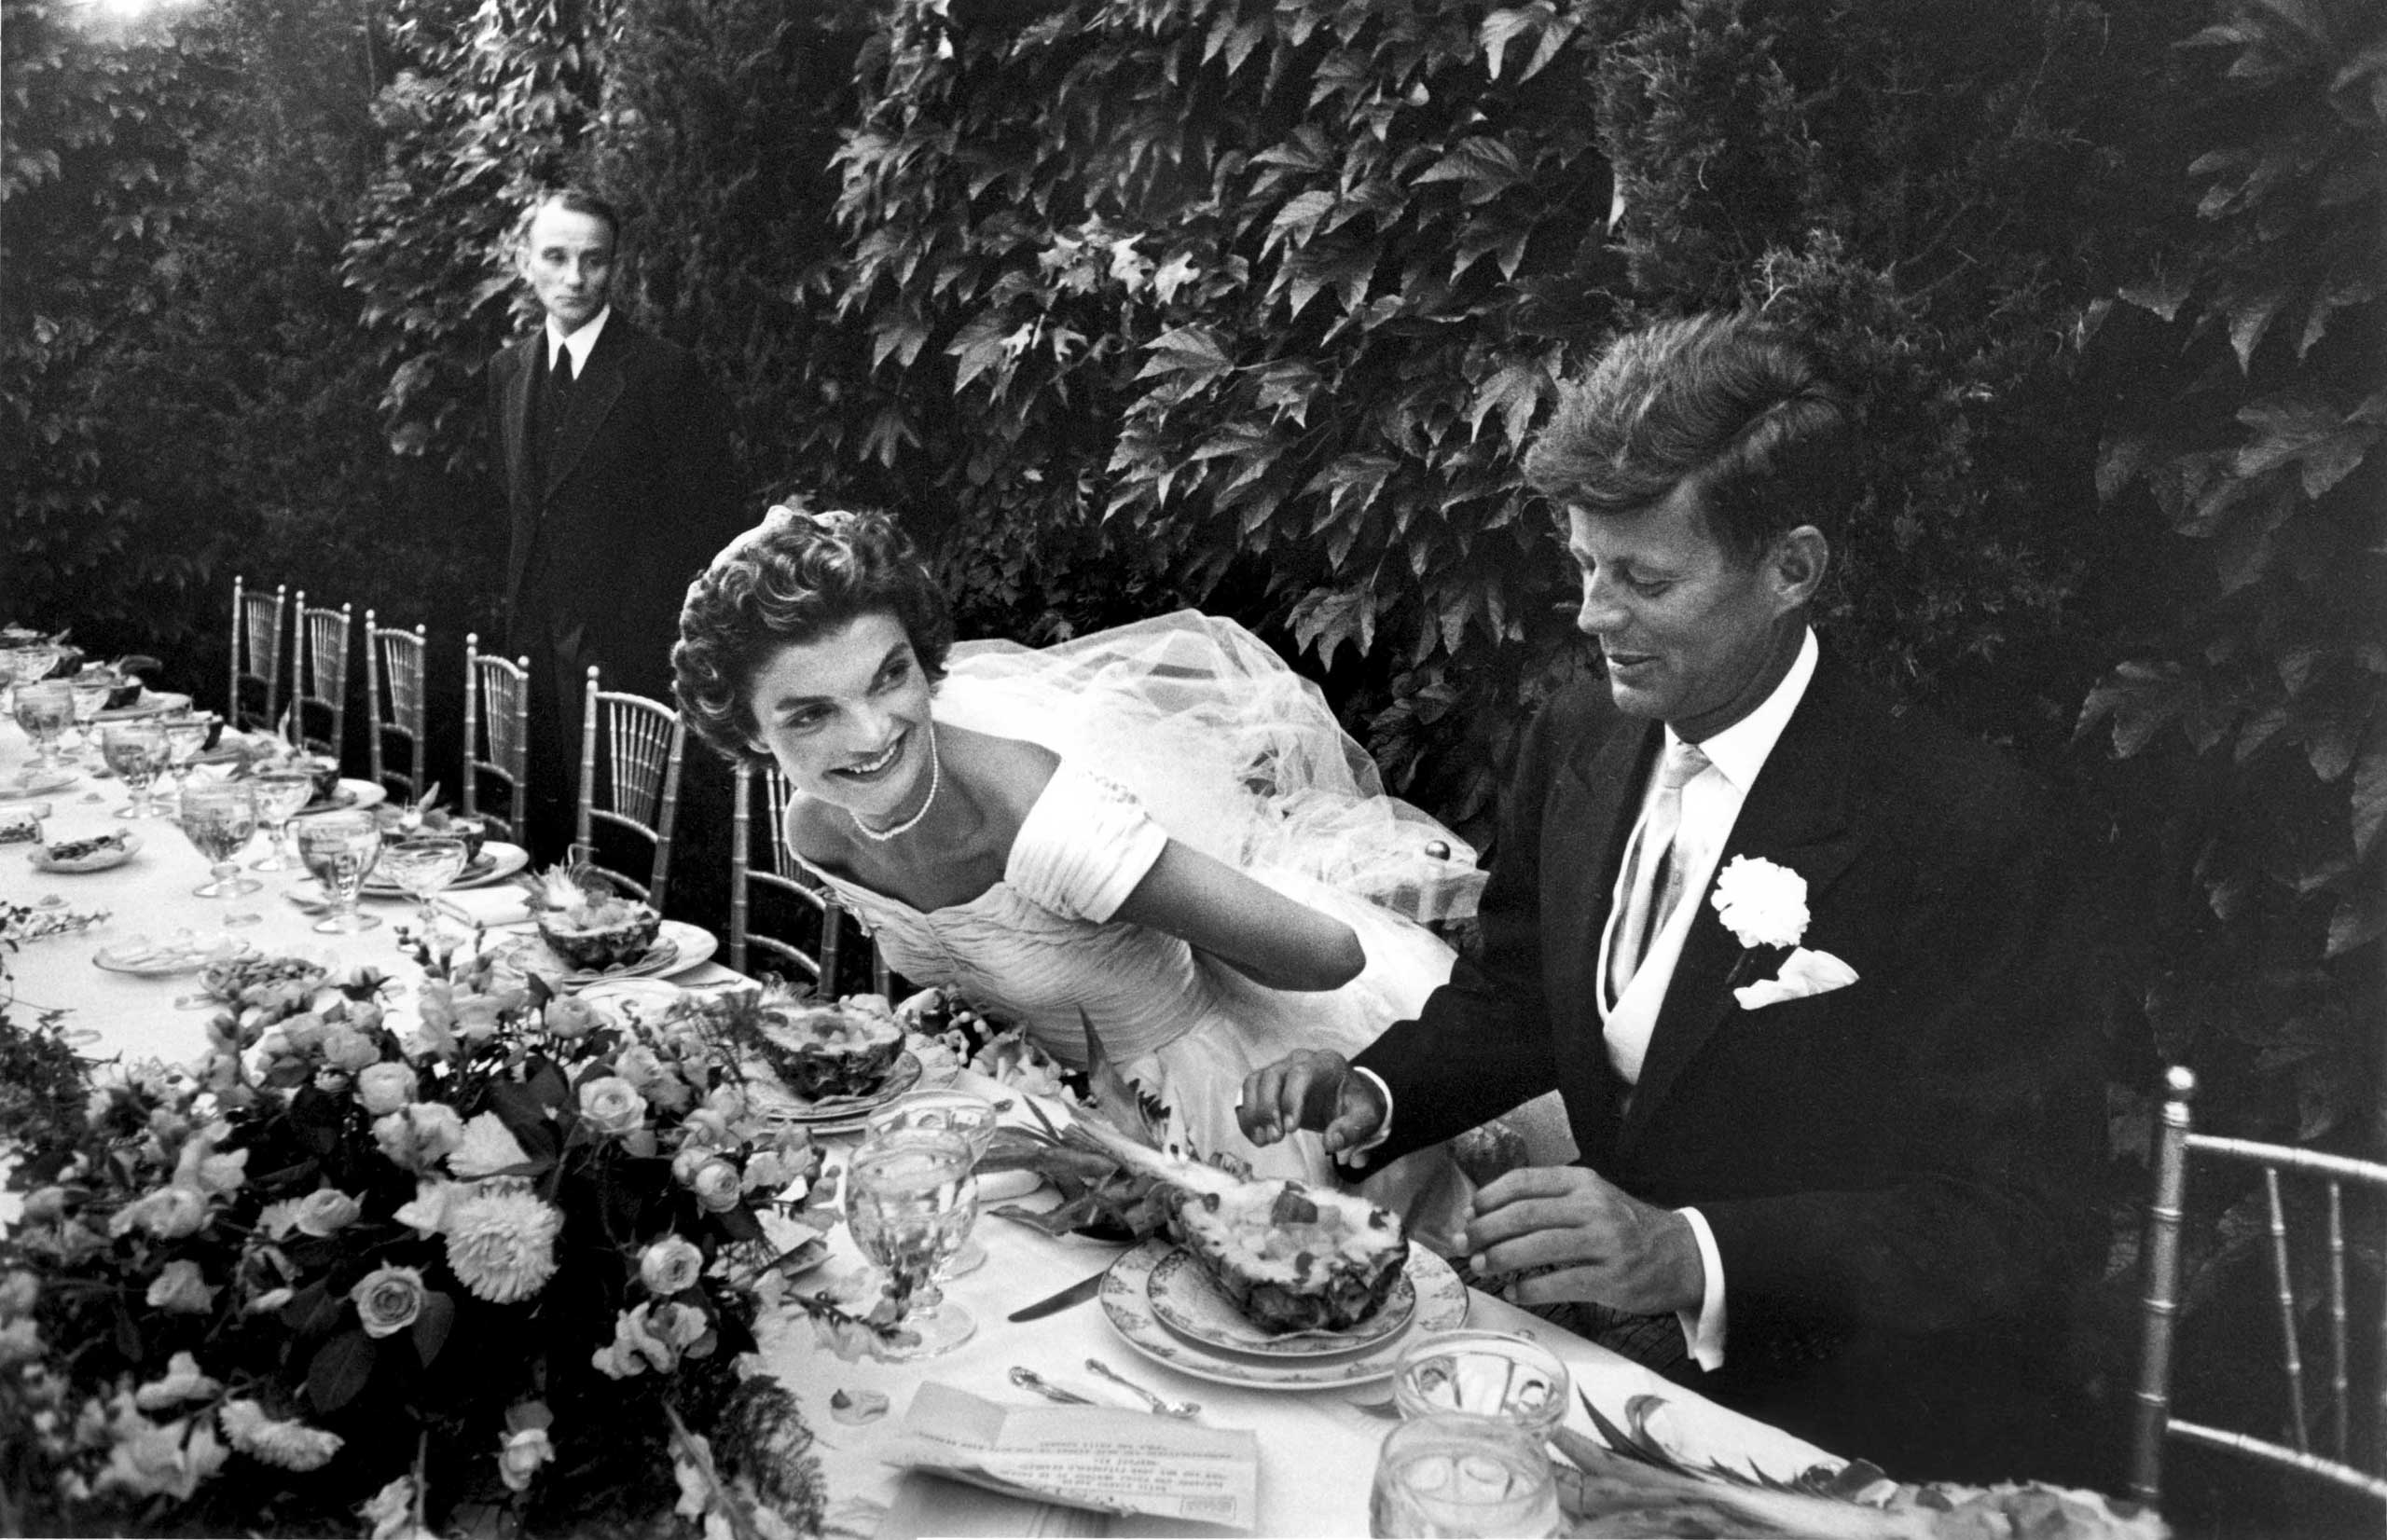 1953 | Senator John Kennedy and his bride, Jacqueline Bouvier Kennedy, smile during their wedding reception, September 12, 1953, in Newport, Rhode Island. Originally published in the September 26, 1953, issue of LIFE.